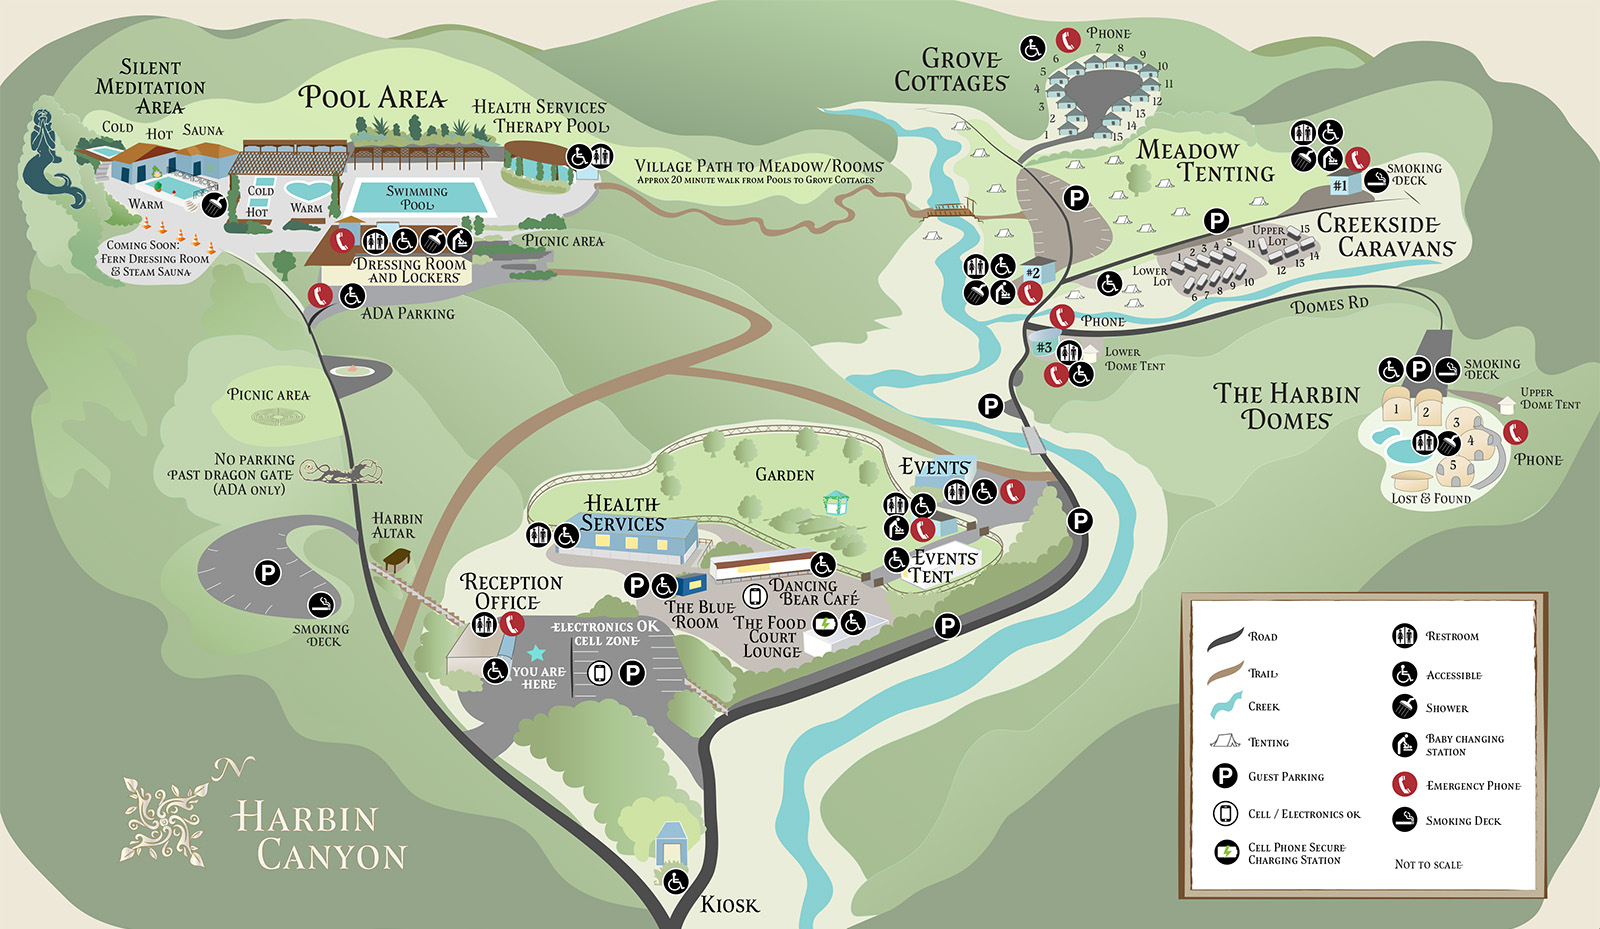 Map of Harbin Canyon shows the two main roads. Upon entry, the road to the left of the Kiosk leads to the pool area, the road to the right leads to the Grove Cottages, Meadow Tenting, Creekside Caravans and Harbin Domes. Both roads connect for entry to the Reception Office. 